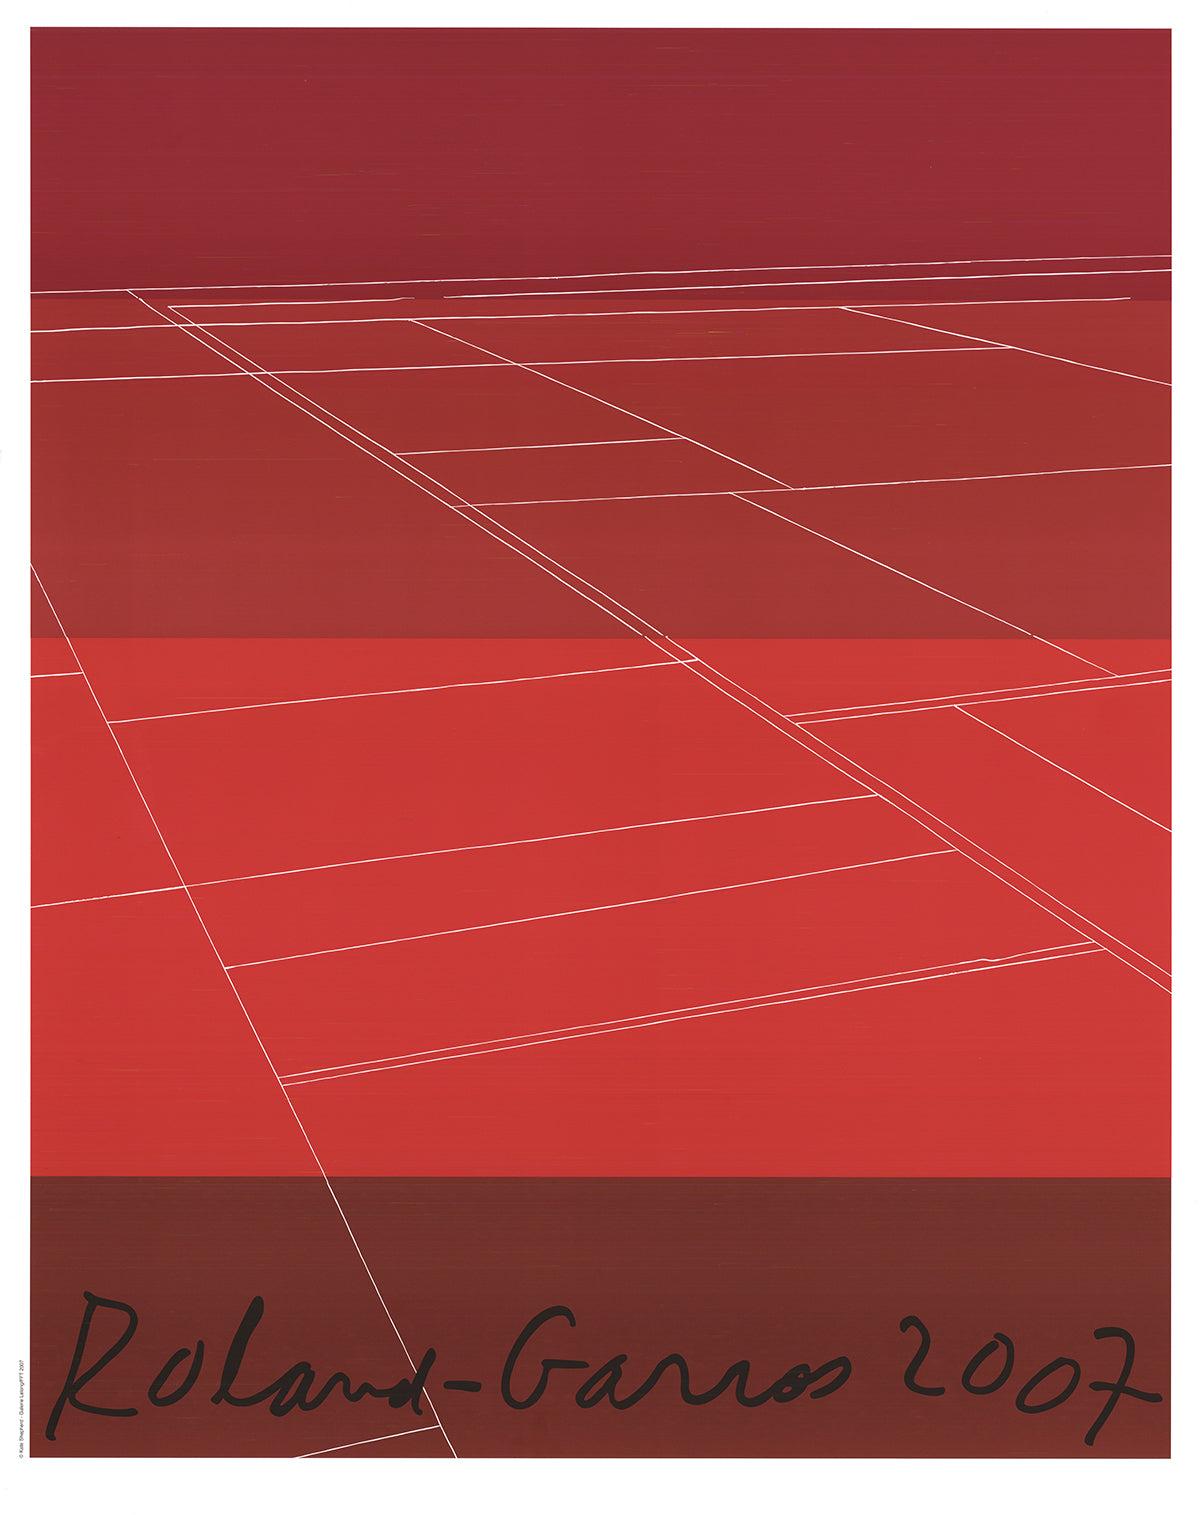 Paper Size: 30 x 23.5 inches ( 76.2 x 59.69 cm )
Image Size: 28 x 22.5 inches ( 71.12 x 57.15 cm )
Framed: No
Condition: A: Mint

Additional Details: Official poster designed and created for the tennis tournament held at Roland Garros French Open